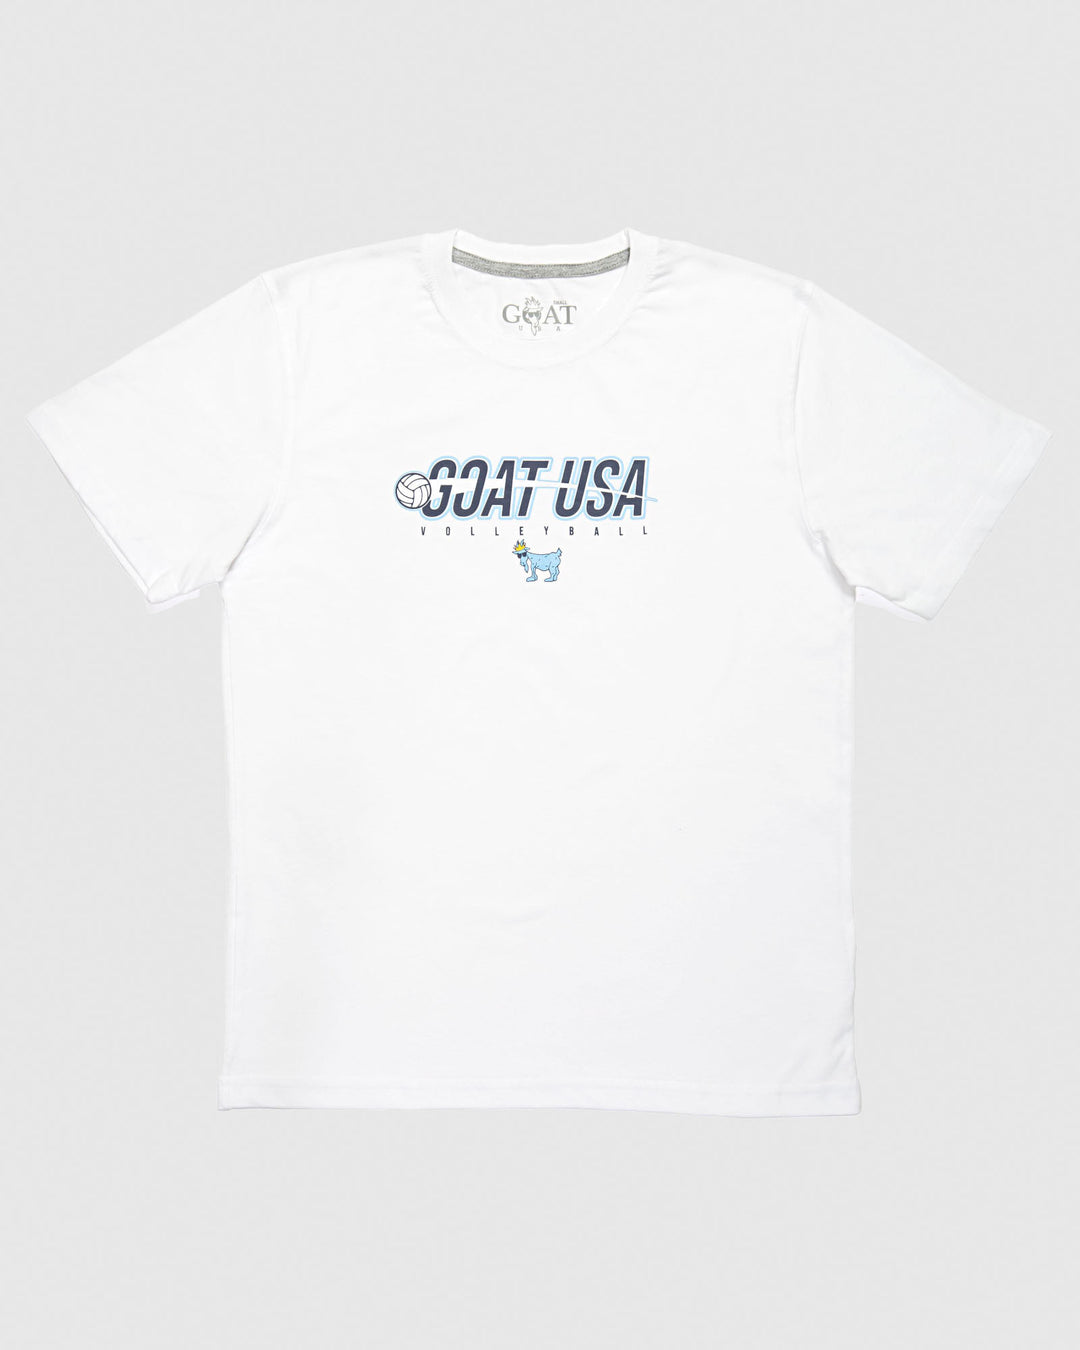 White shirt with volleyball that goes through the wording "GOAT USA"